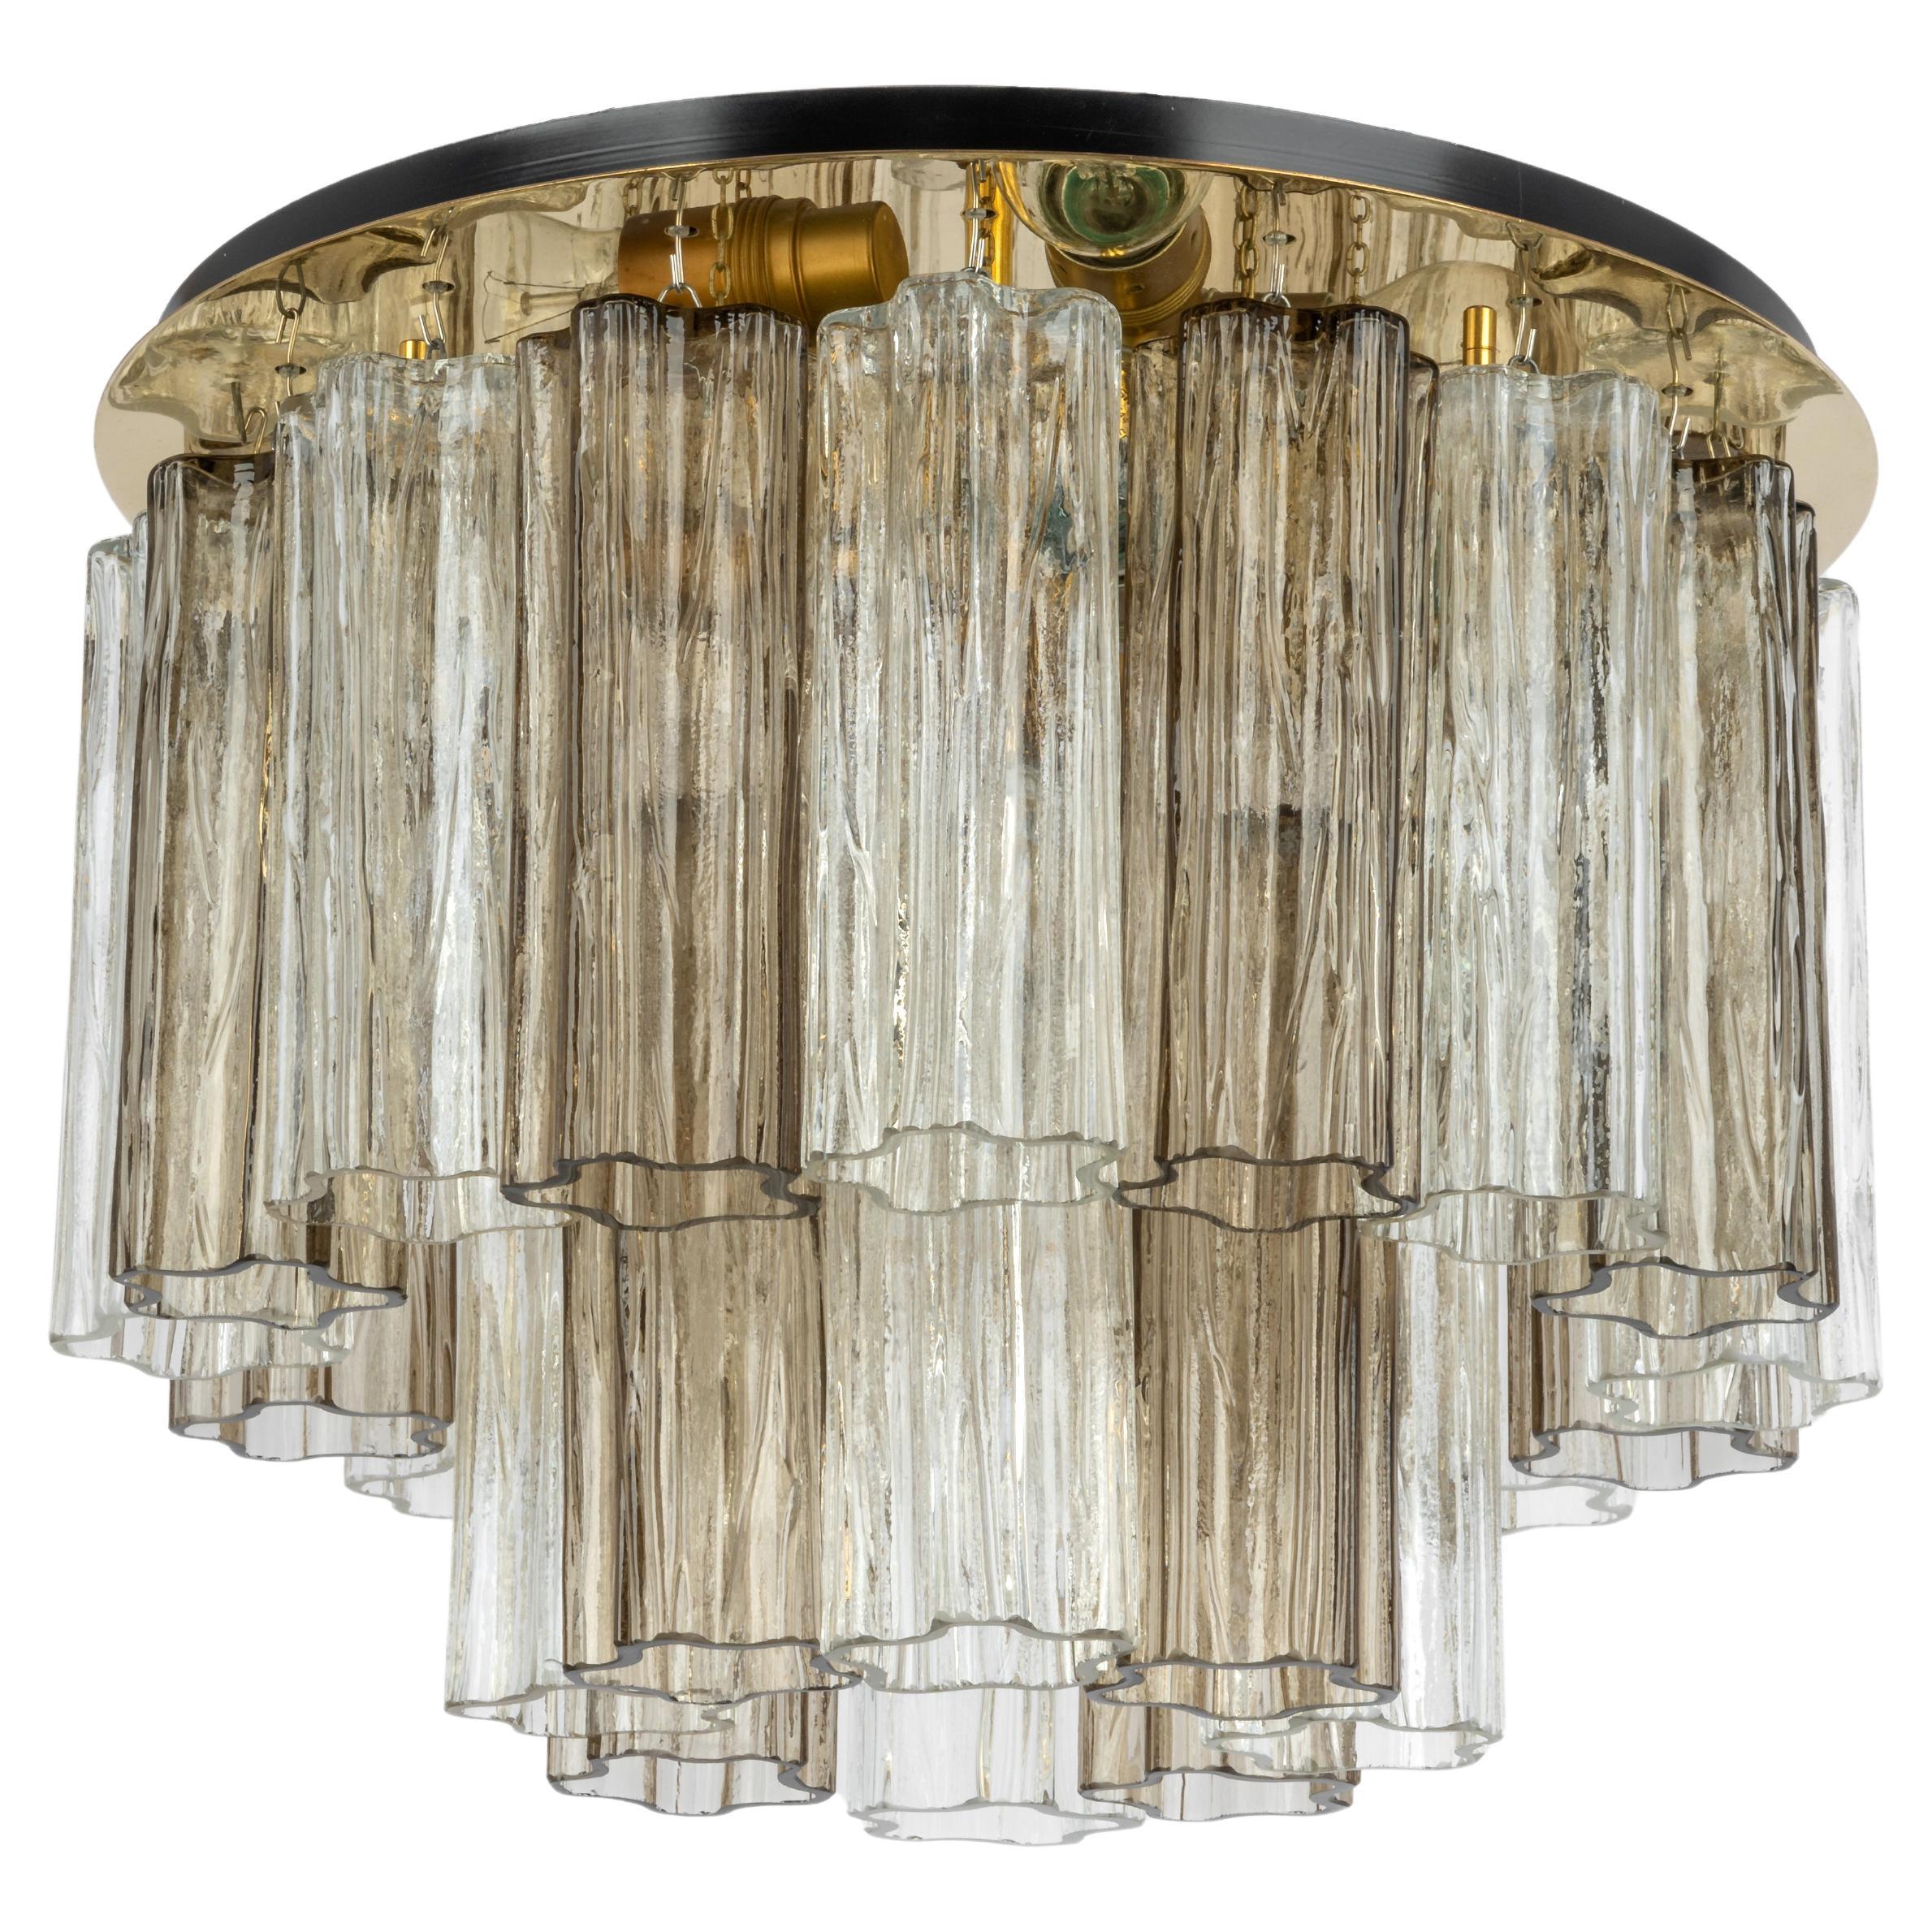 Stunning Murano glass chandelier designed by Venini for Kalmar, 1960s
Two tiers gather many structured glasses, beautifully refracting the light very heavy quality.

High quality and in very good condition. Cleaned, well-wired and ready to use.
The